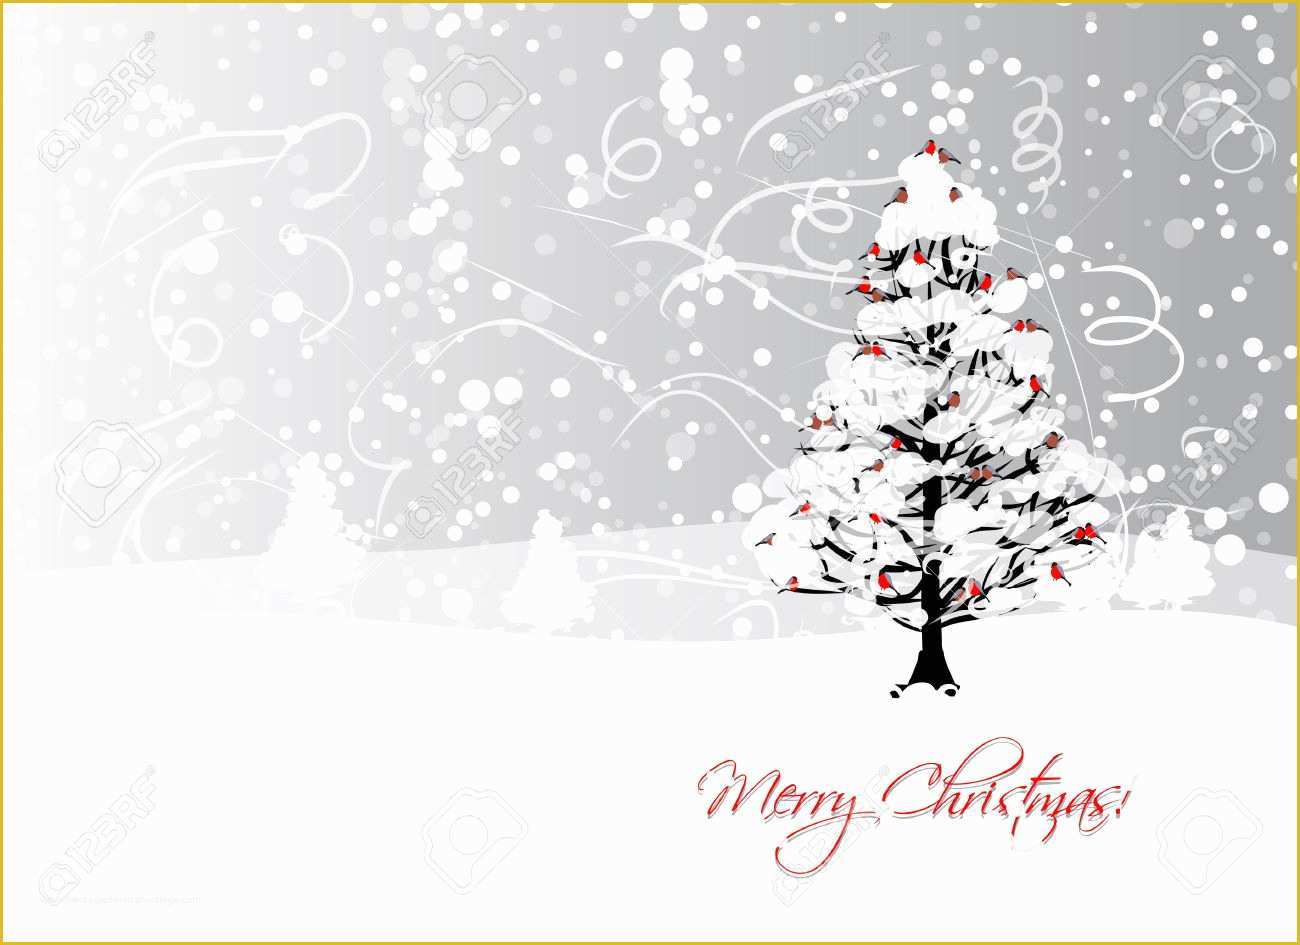 Free Holiday Card Templates Of Free Christmas Card Design Templates – Merry Christmas